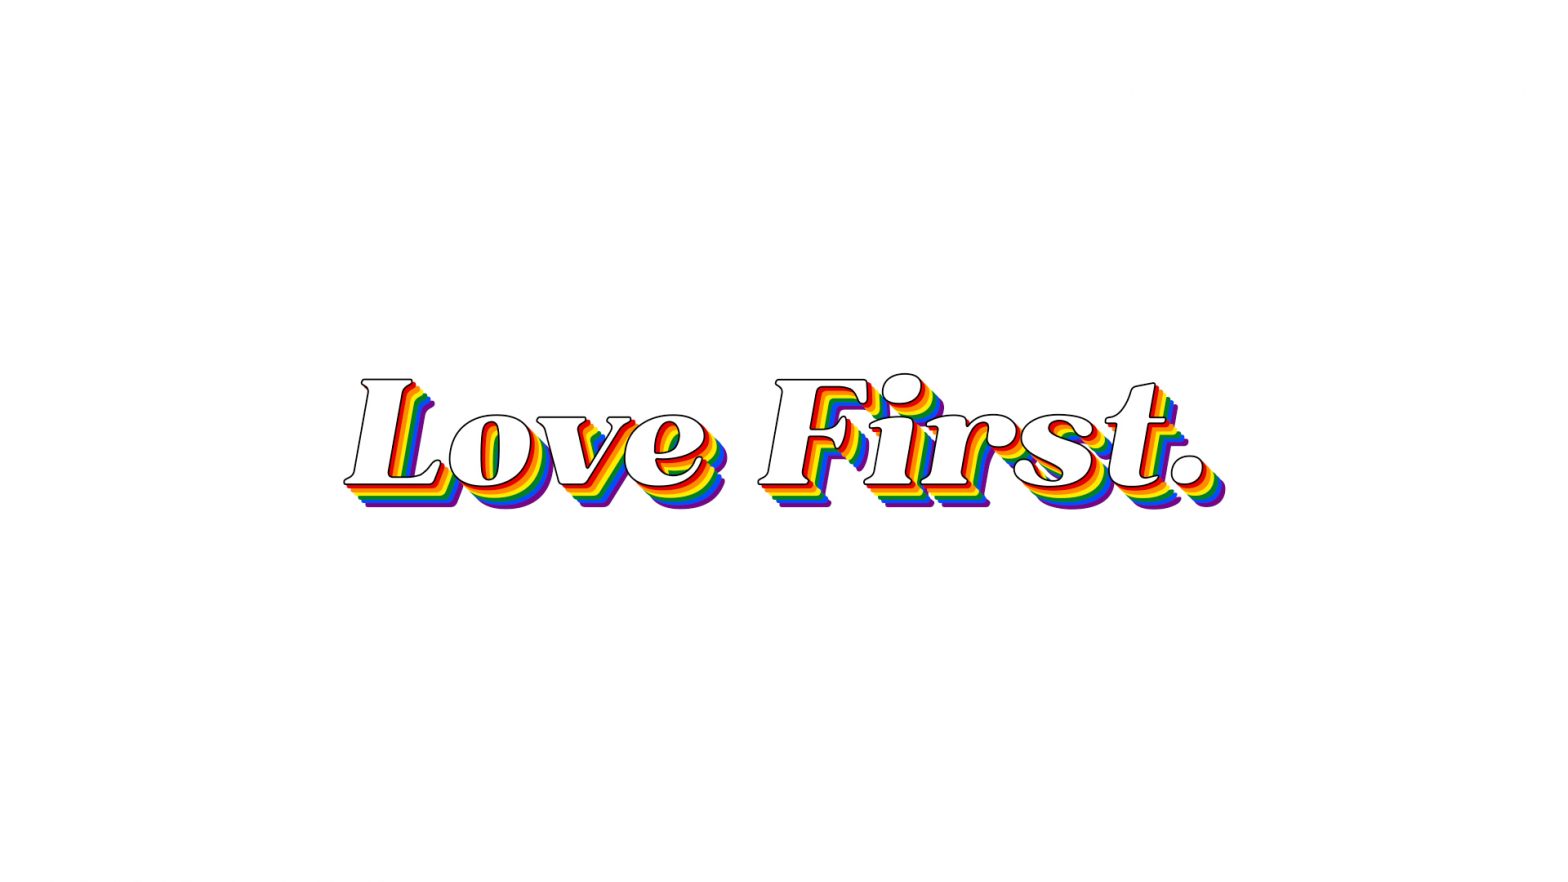 Love First. image